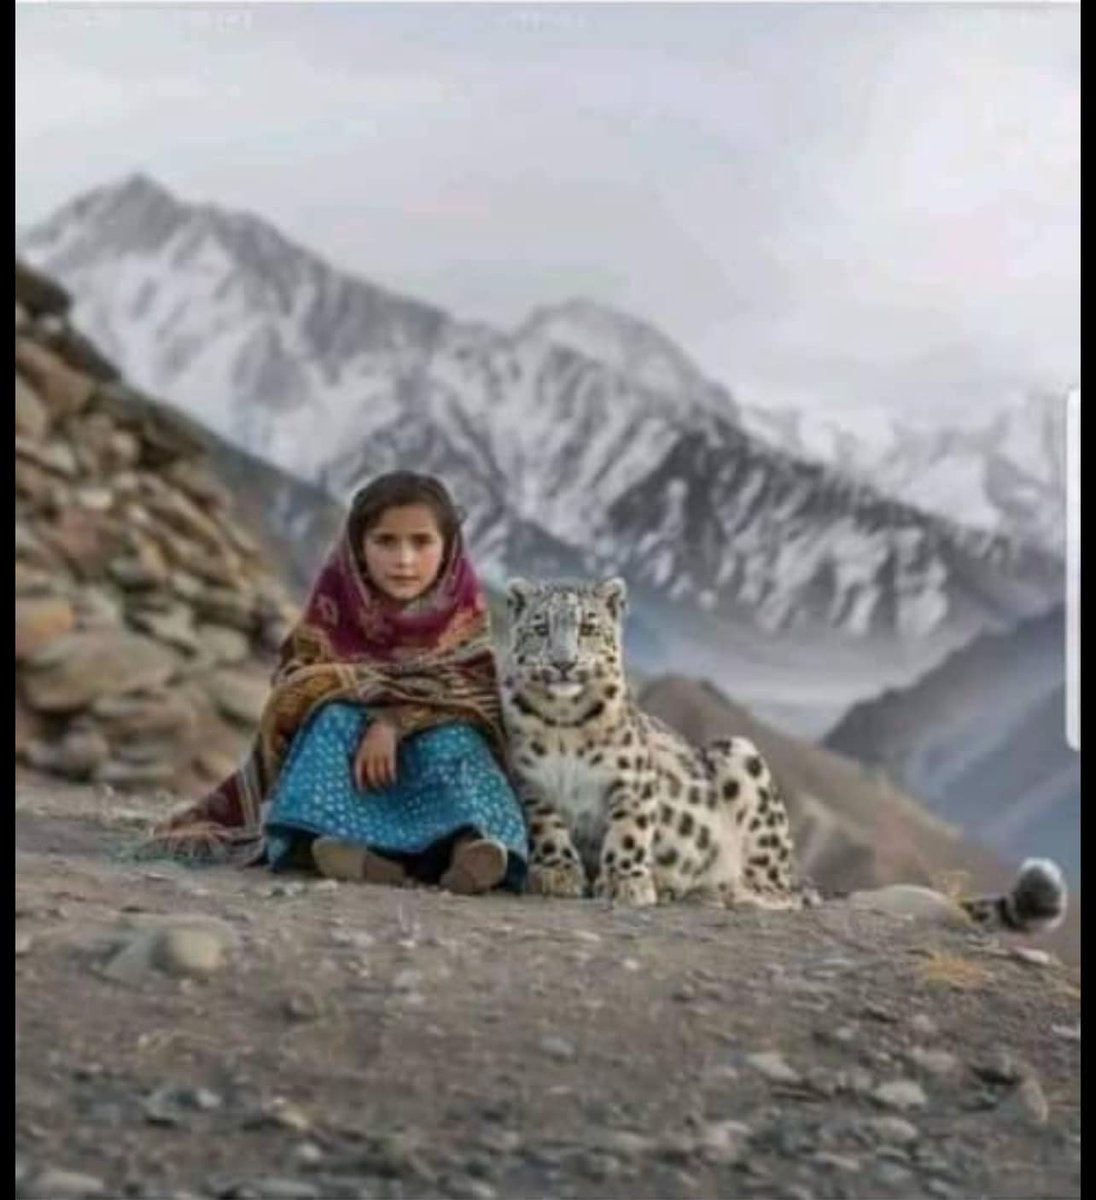 Solomon Ahmadzai

'Meet the incredible Afghan girl who rescued a baby snow leopard She nurtured and cared for the cub until it was ready to return to the Pamir Mountains. Now, the majestic snow leopard visits her frequently, spending hours in her presence.